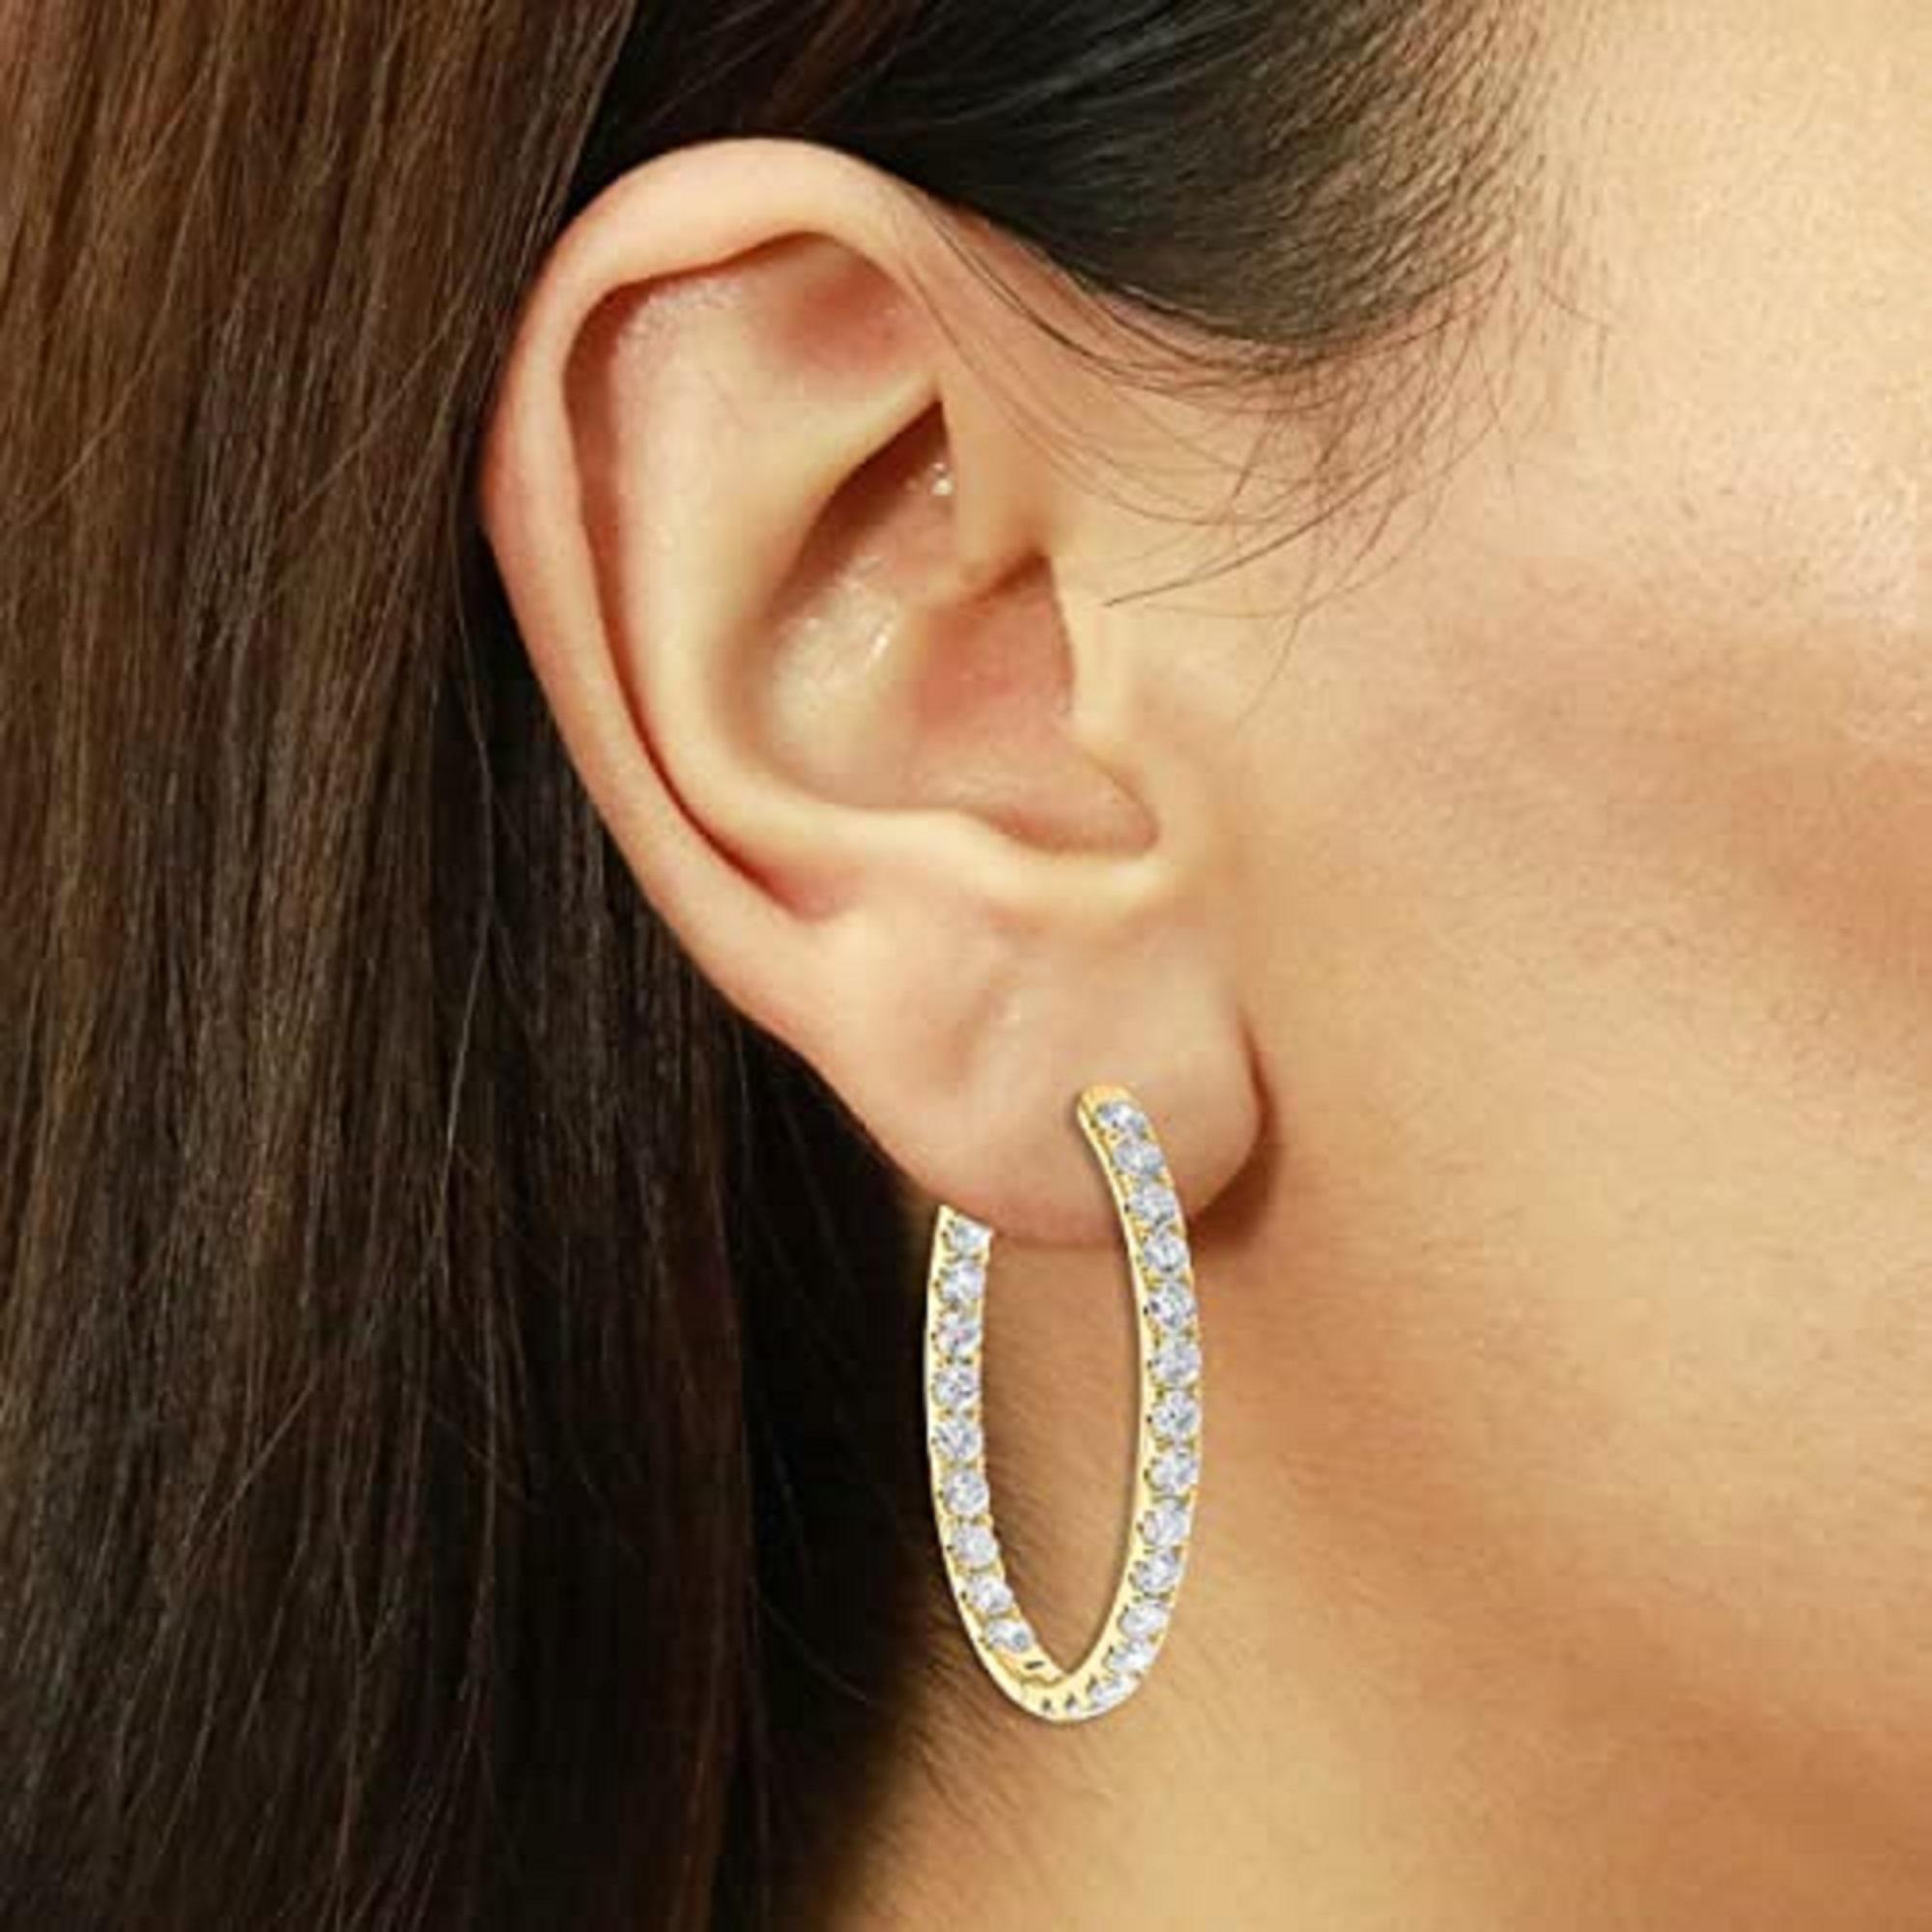 Decorate yourself in elegance with this Earring is crafted from 14-karat Yellow Gold by Gin & Grace. This Earring is made up of Round-cut White Diamond (50 Pcs) 4.11 carat. This Earring is weight 6.50 grams. This delicate Earring is polished to a